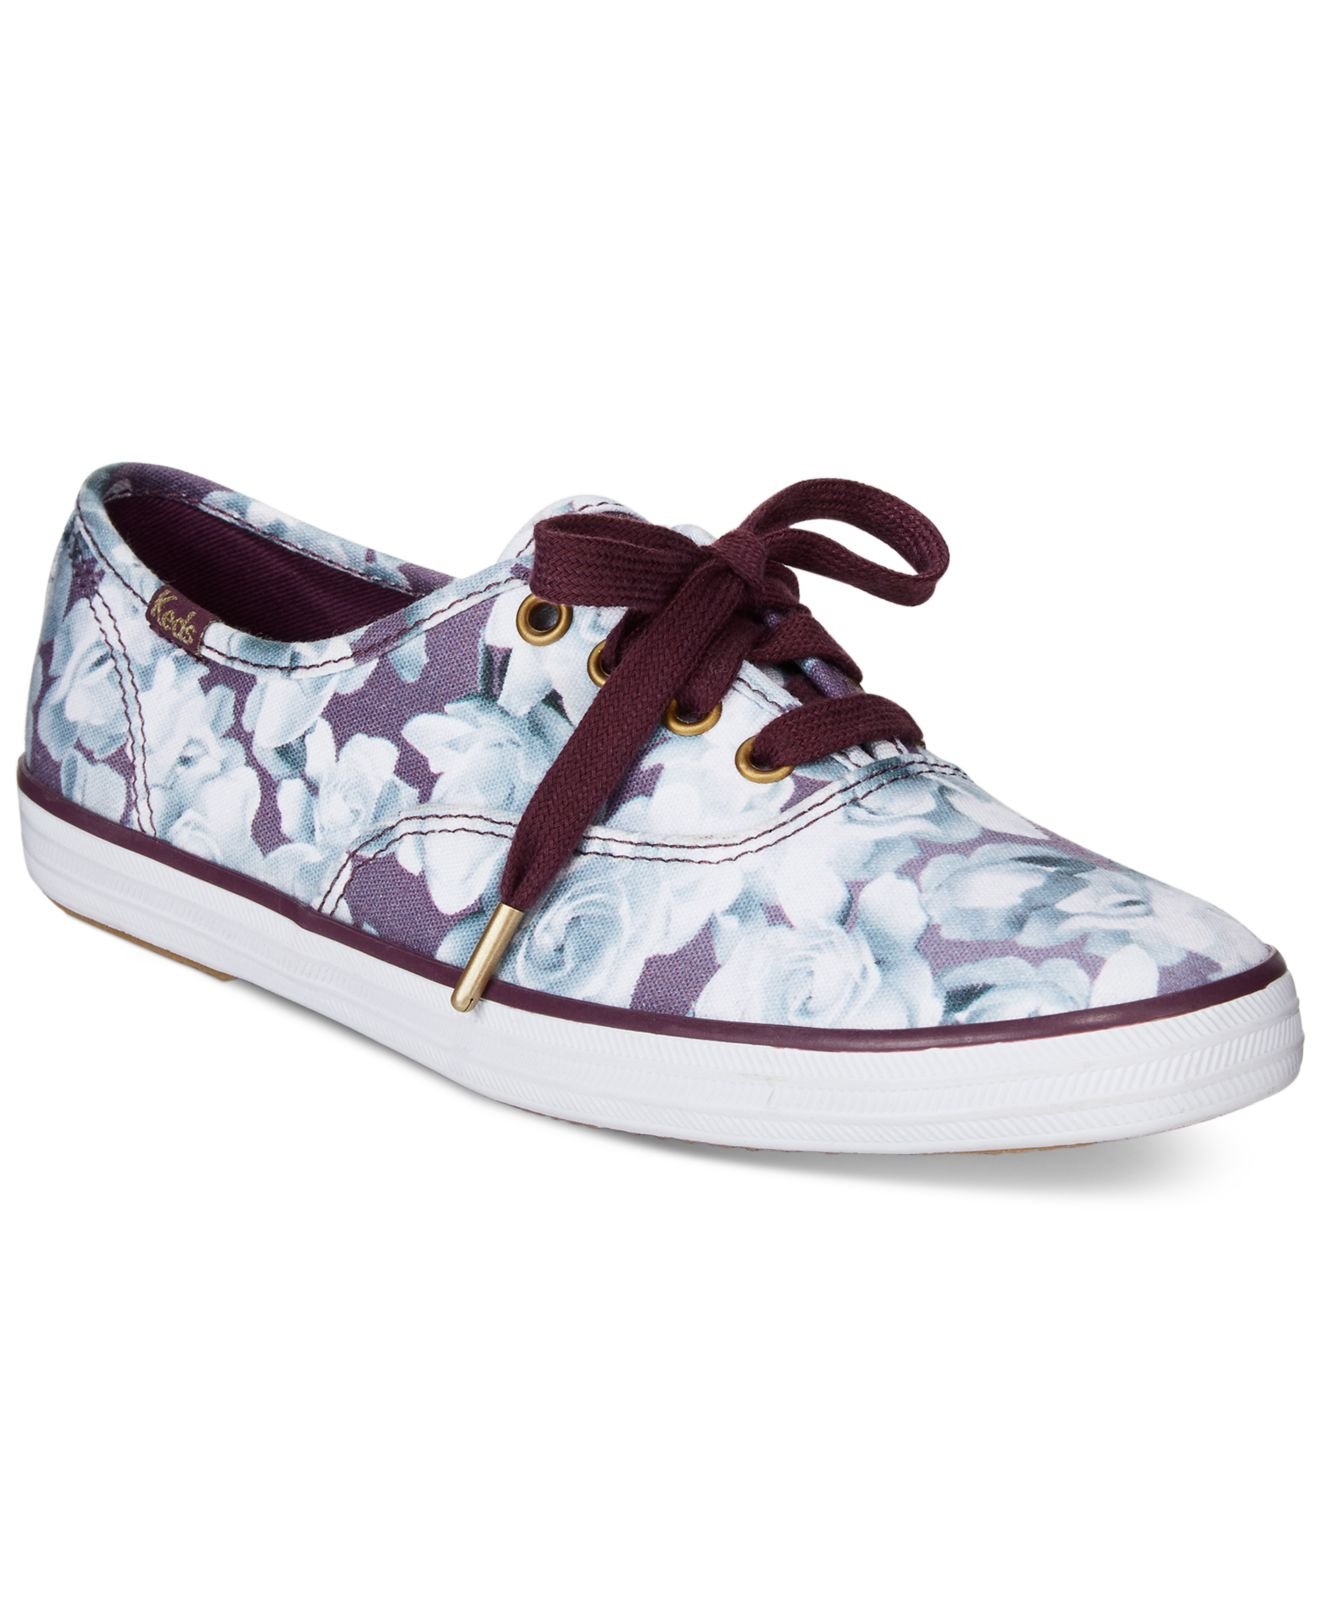 Lyst - Keds Women's Limited Edition Taylor Swift Champion Floral Print ...